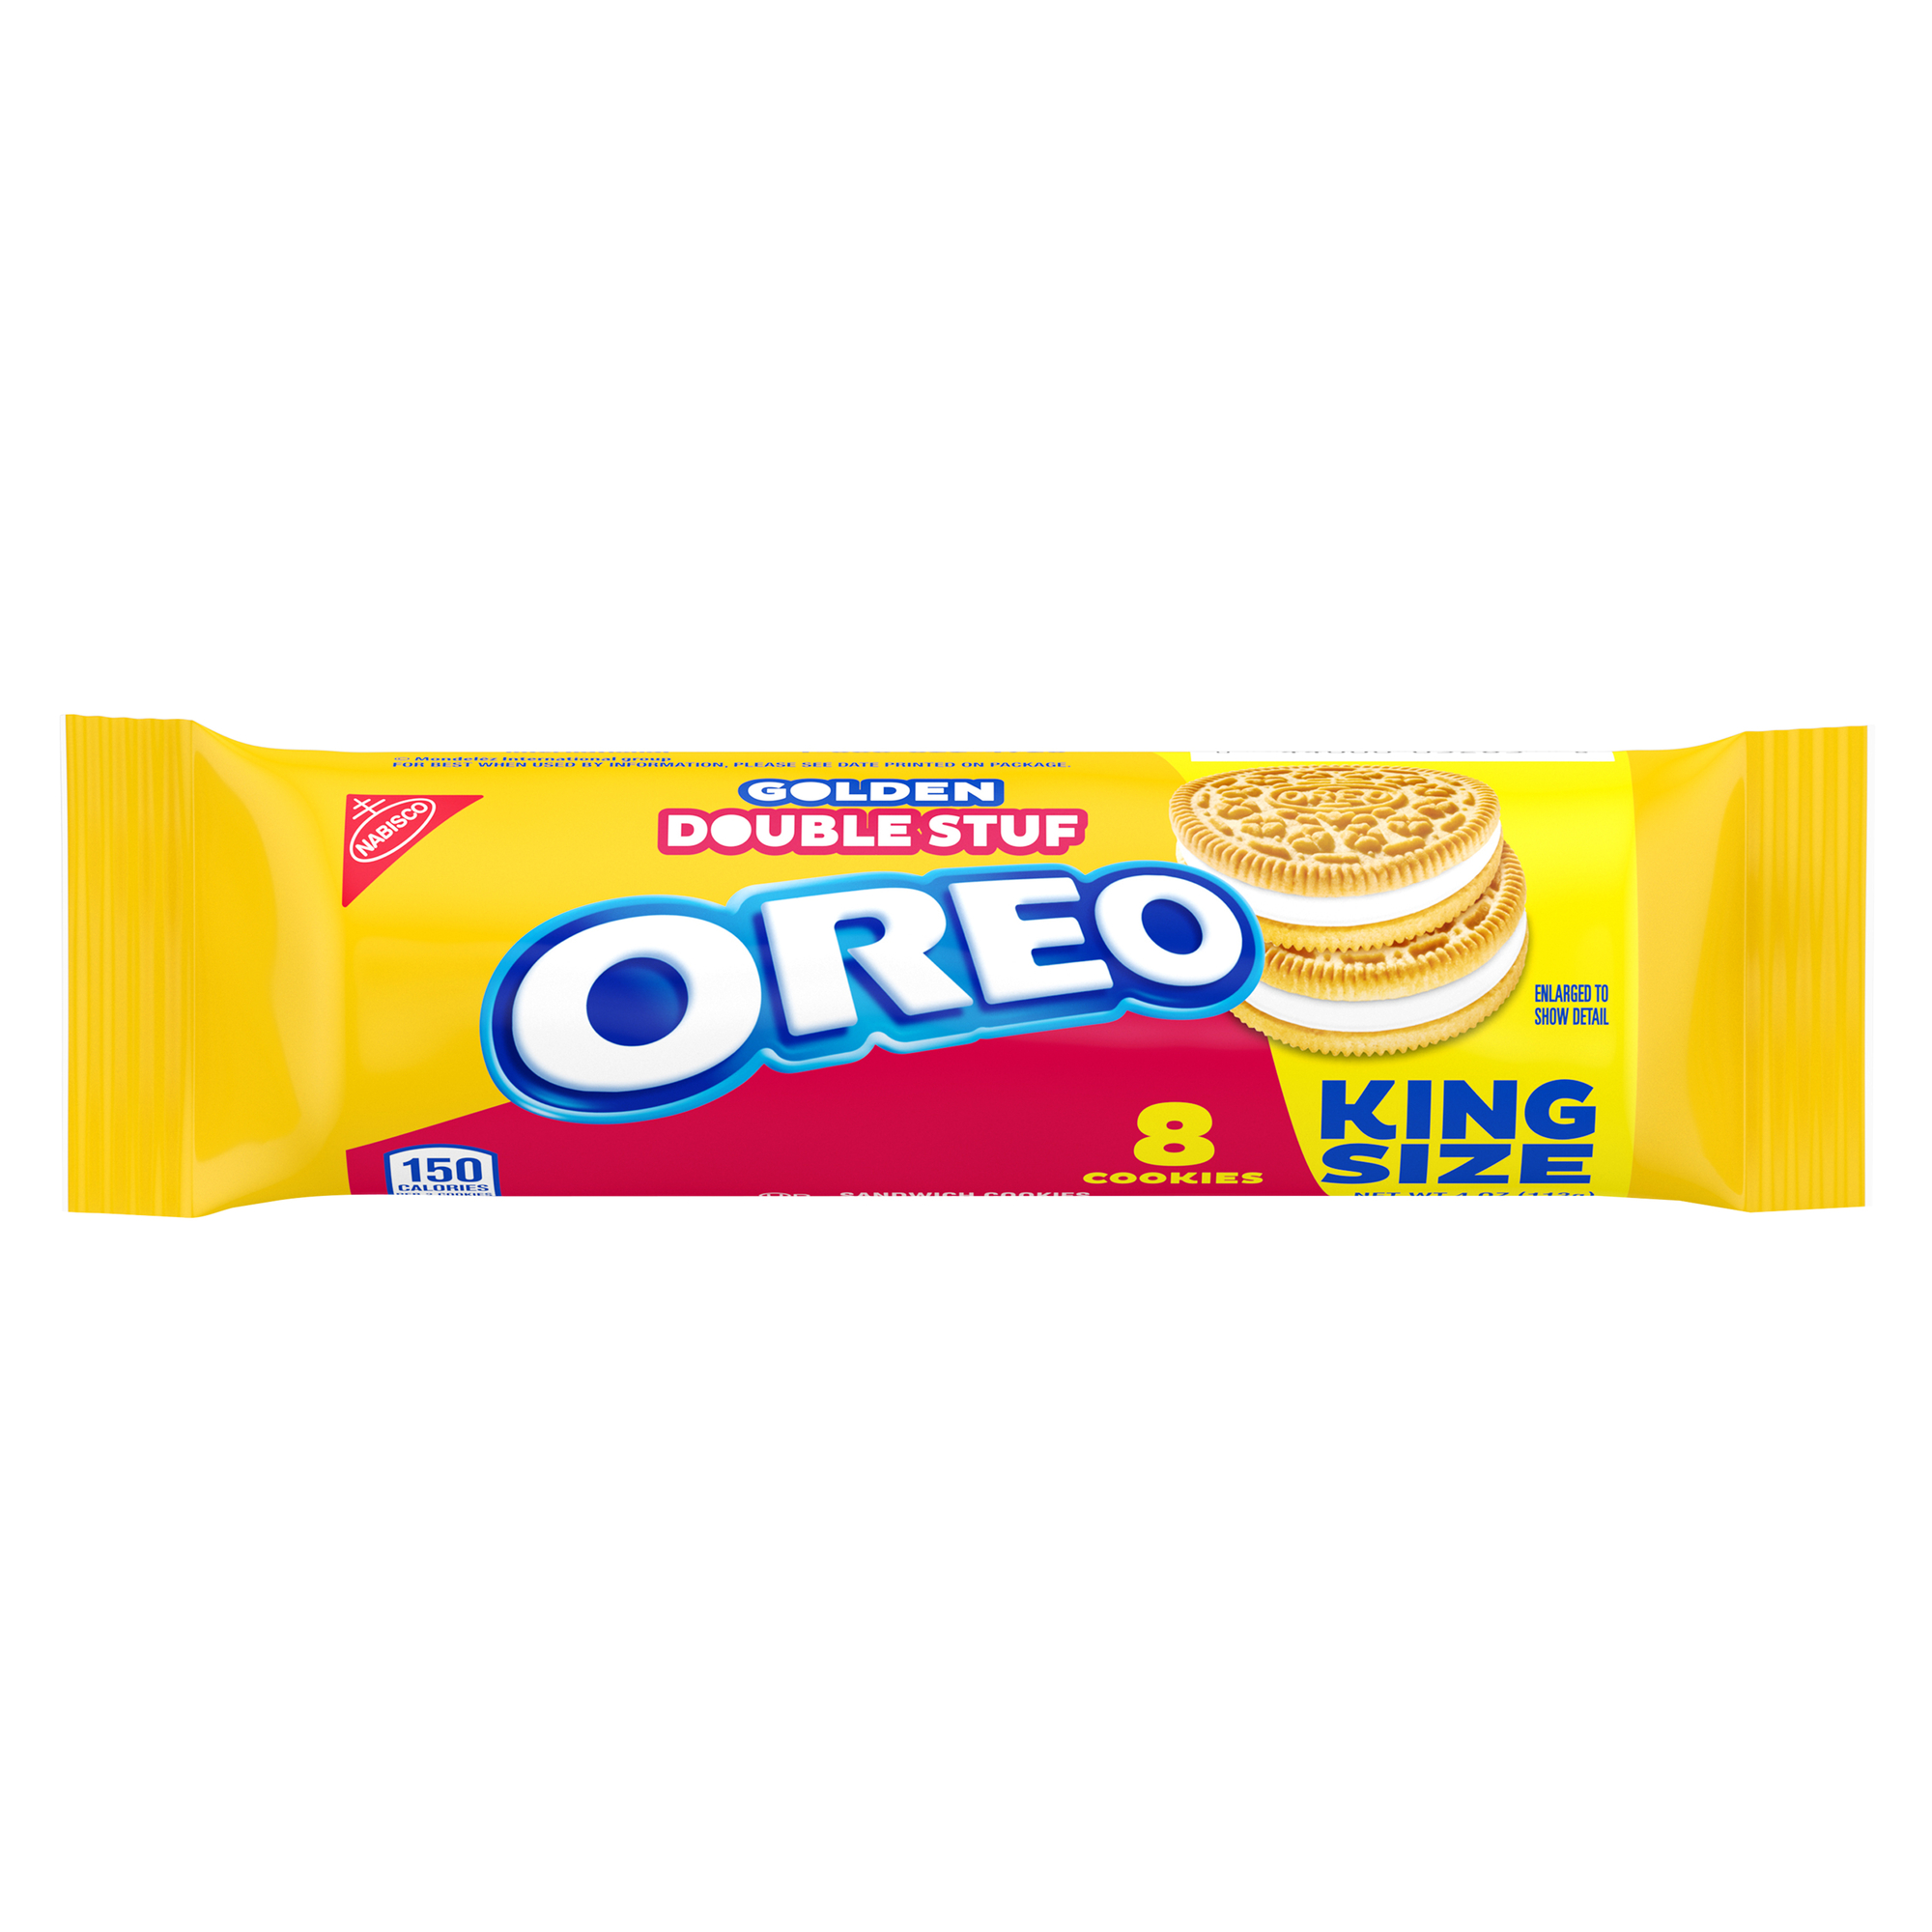 oreo® golden double stuf cookies king size 10-count